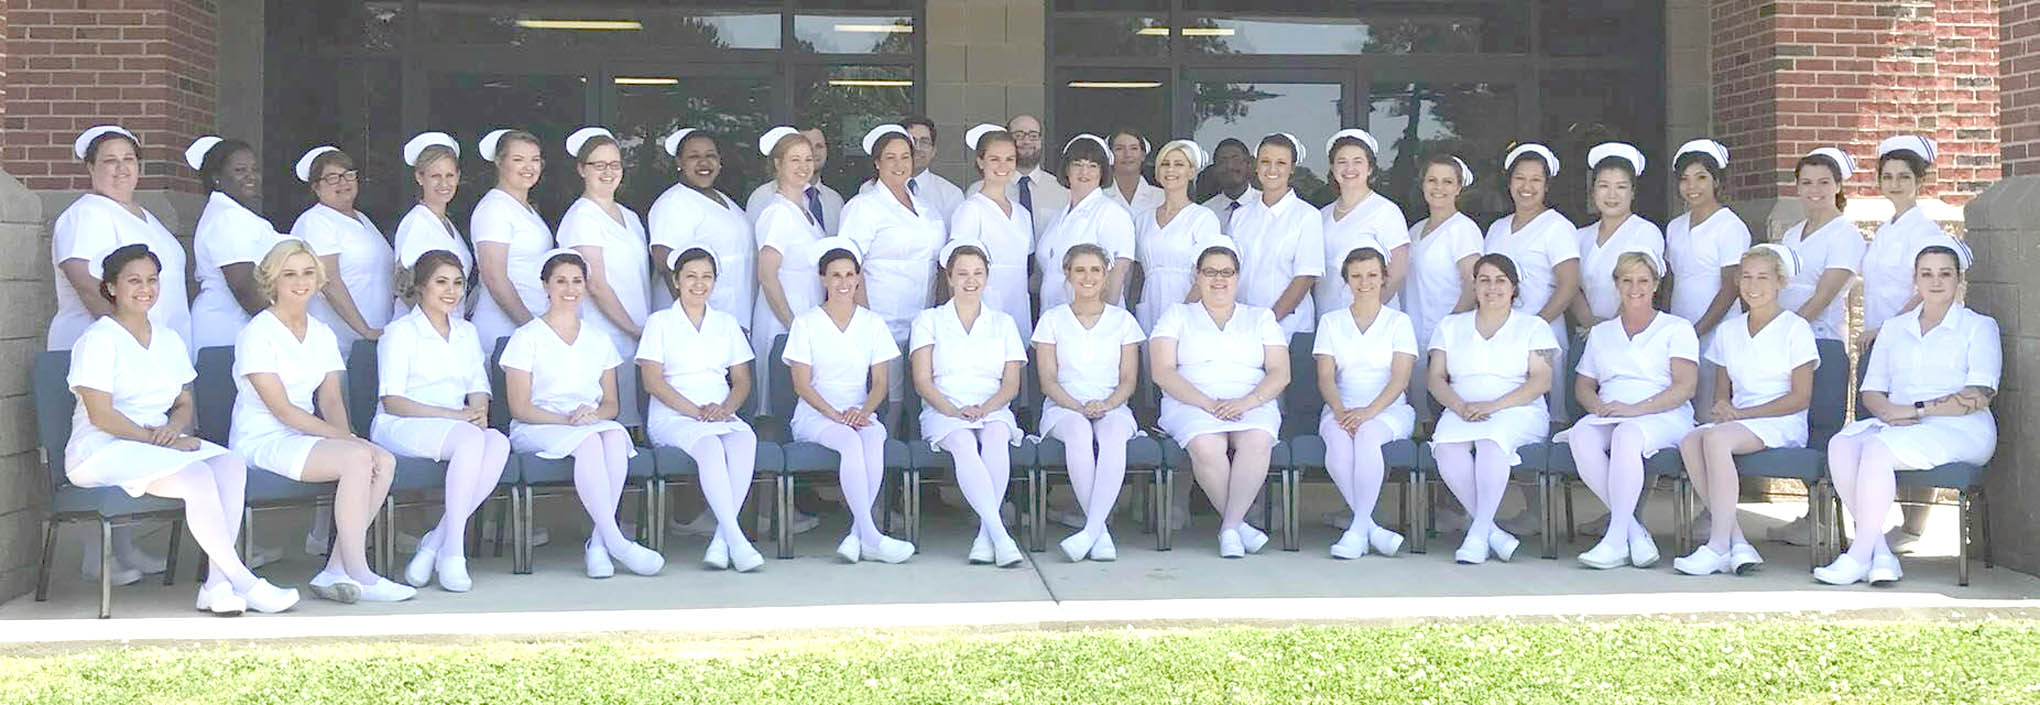 Read the full story, CCCC holds Pinning and Candlelighting Ceremony for Nursing graduates